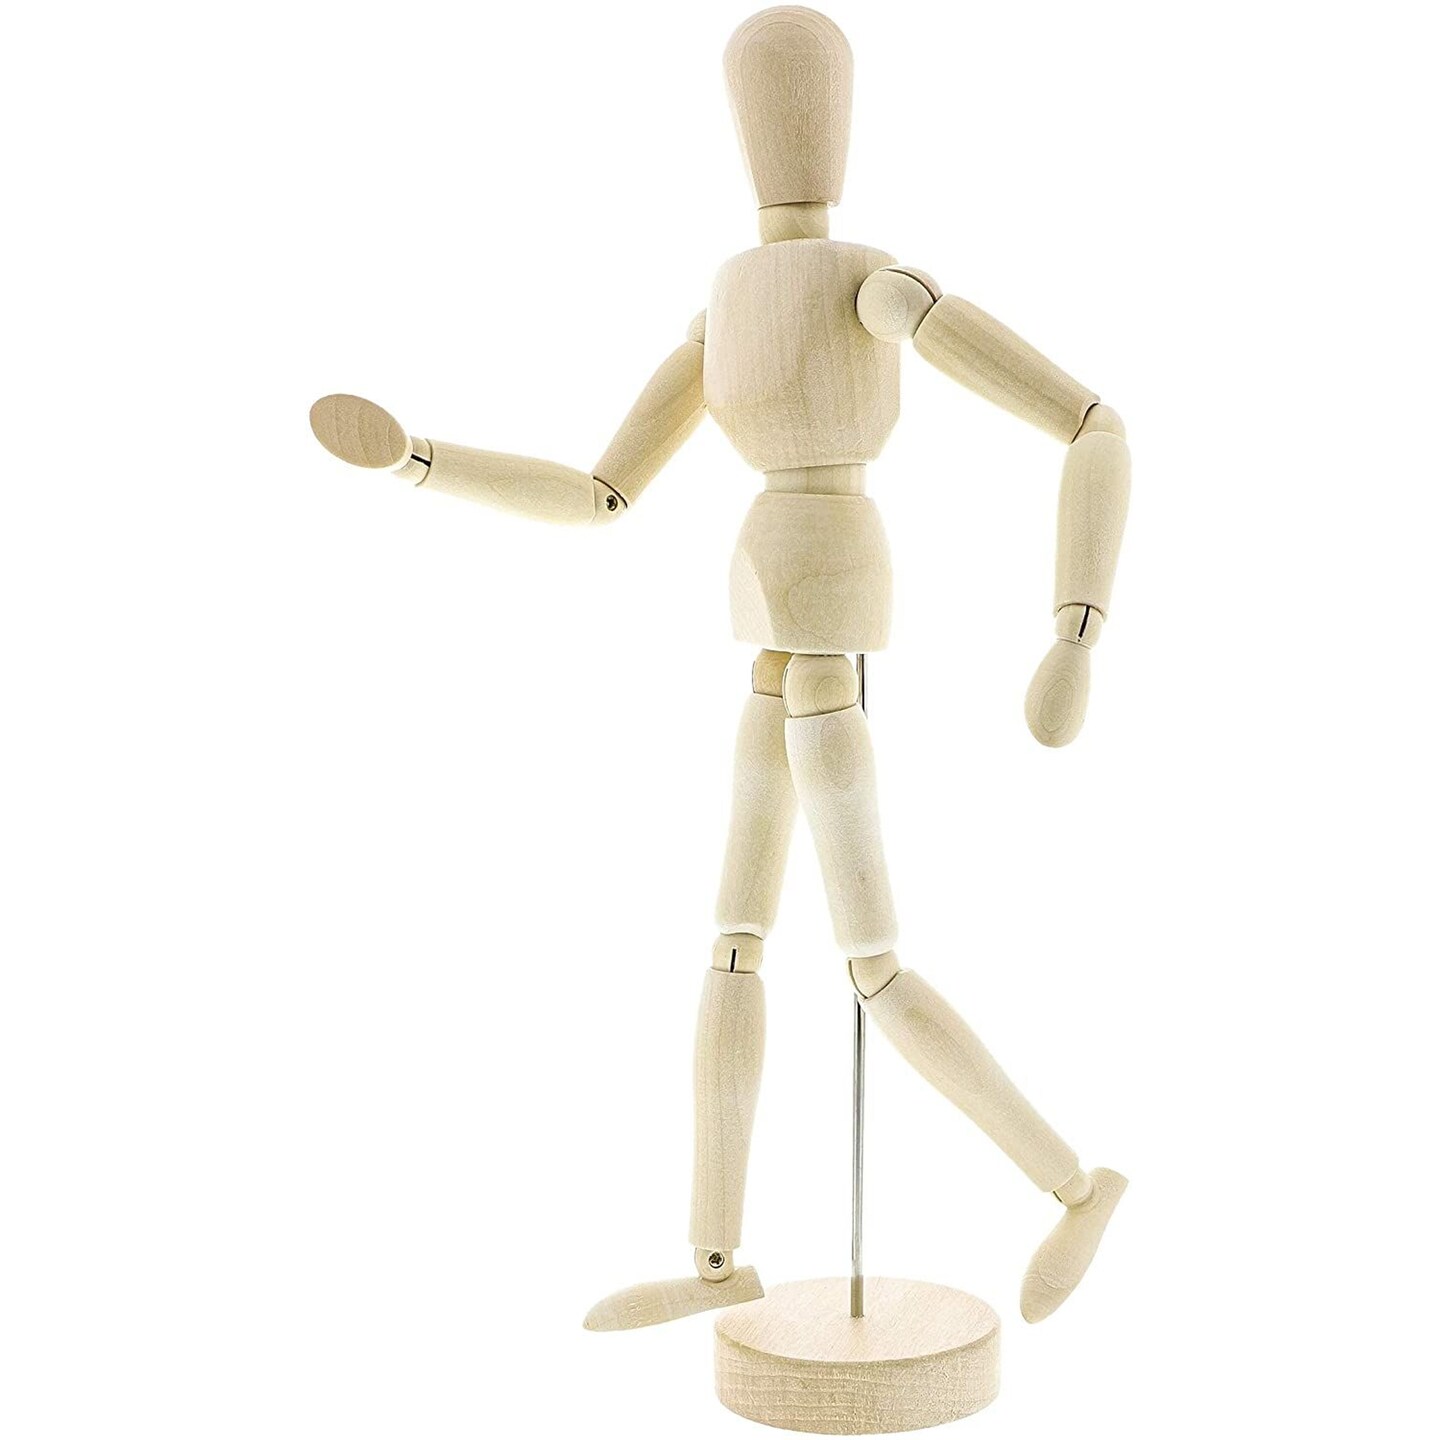 SVG Drawing Mannequin Puppet Poses Wooden Dummy | ArtDraw SVG Editor Online.